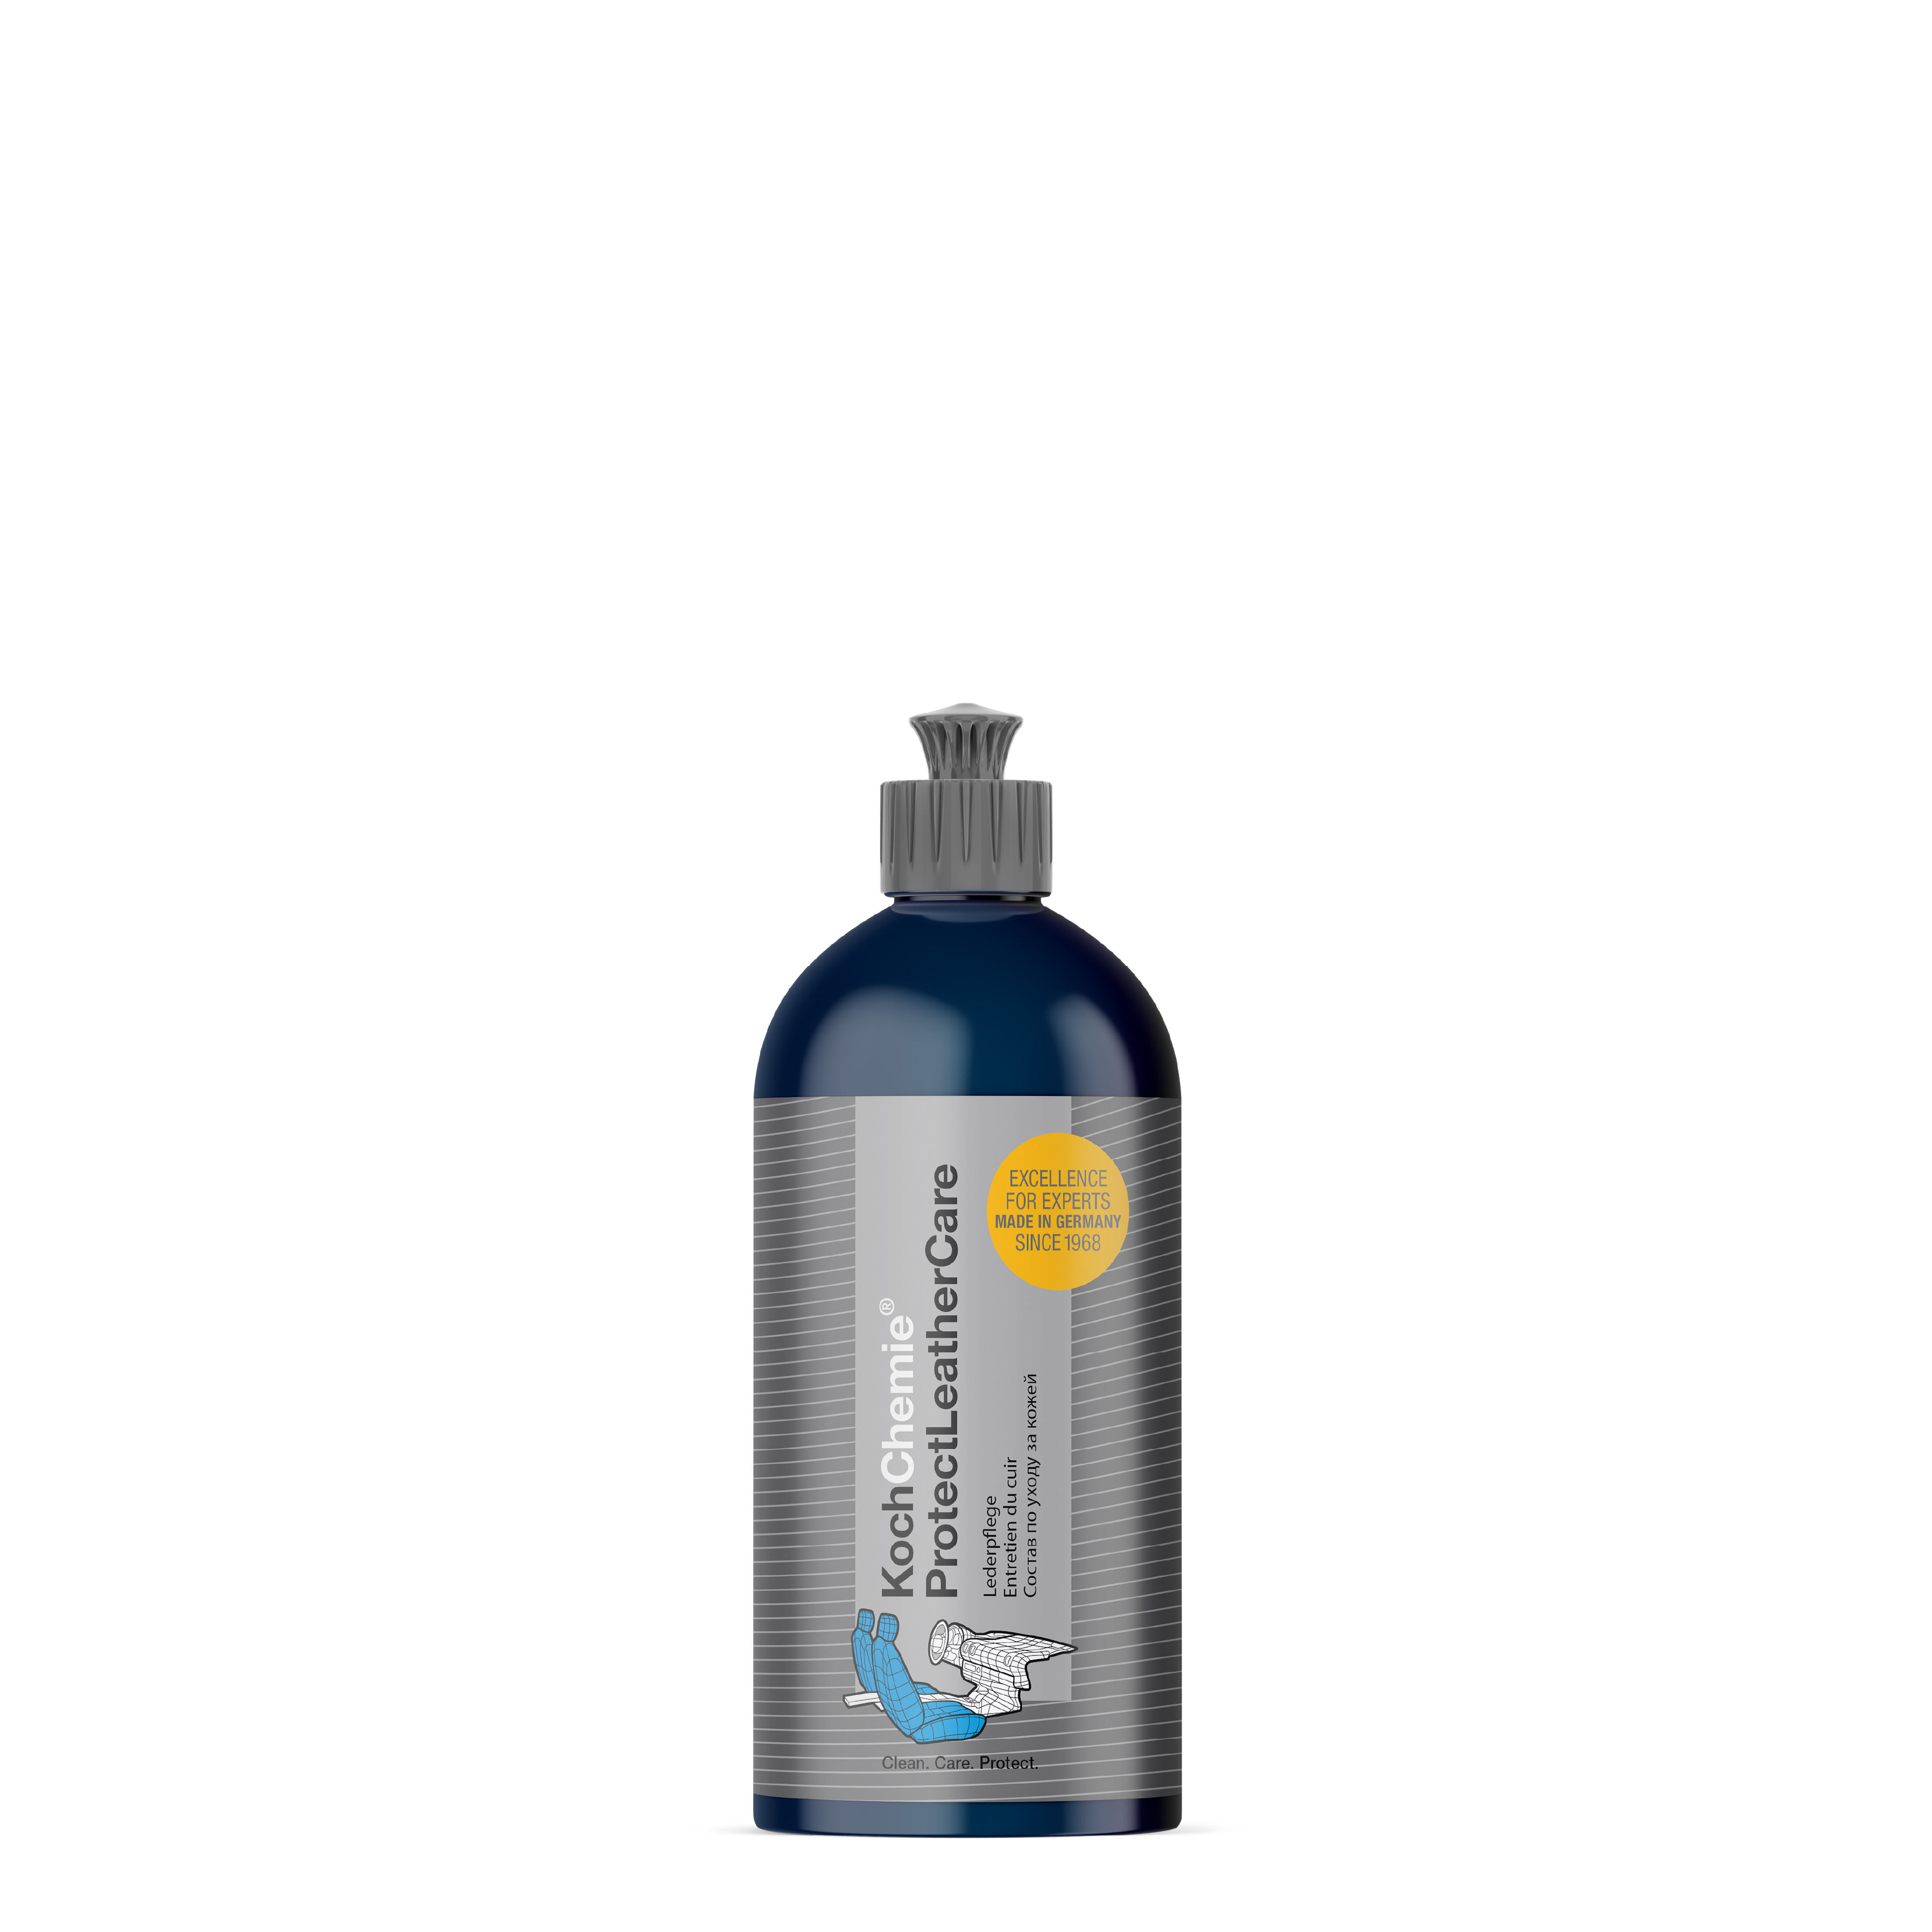 Koch-Chemie Protect Leather Care 0.5l